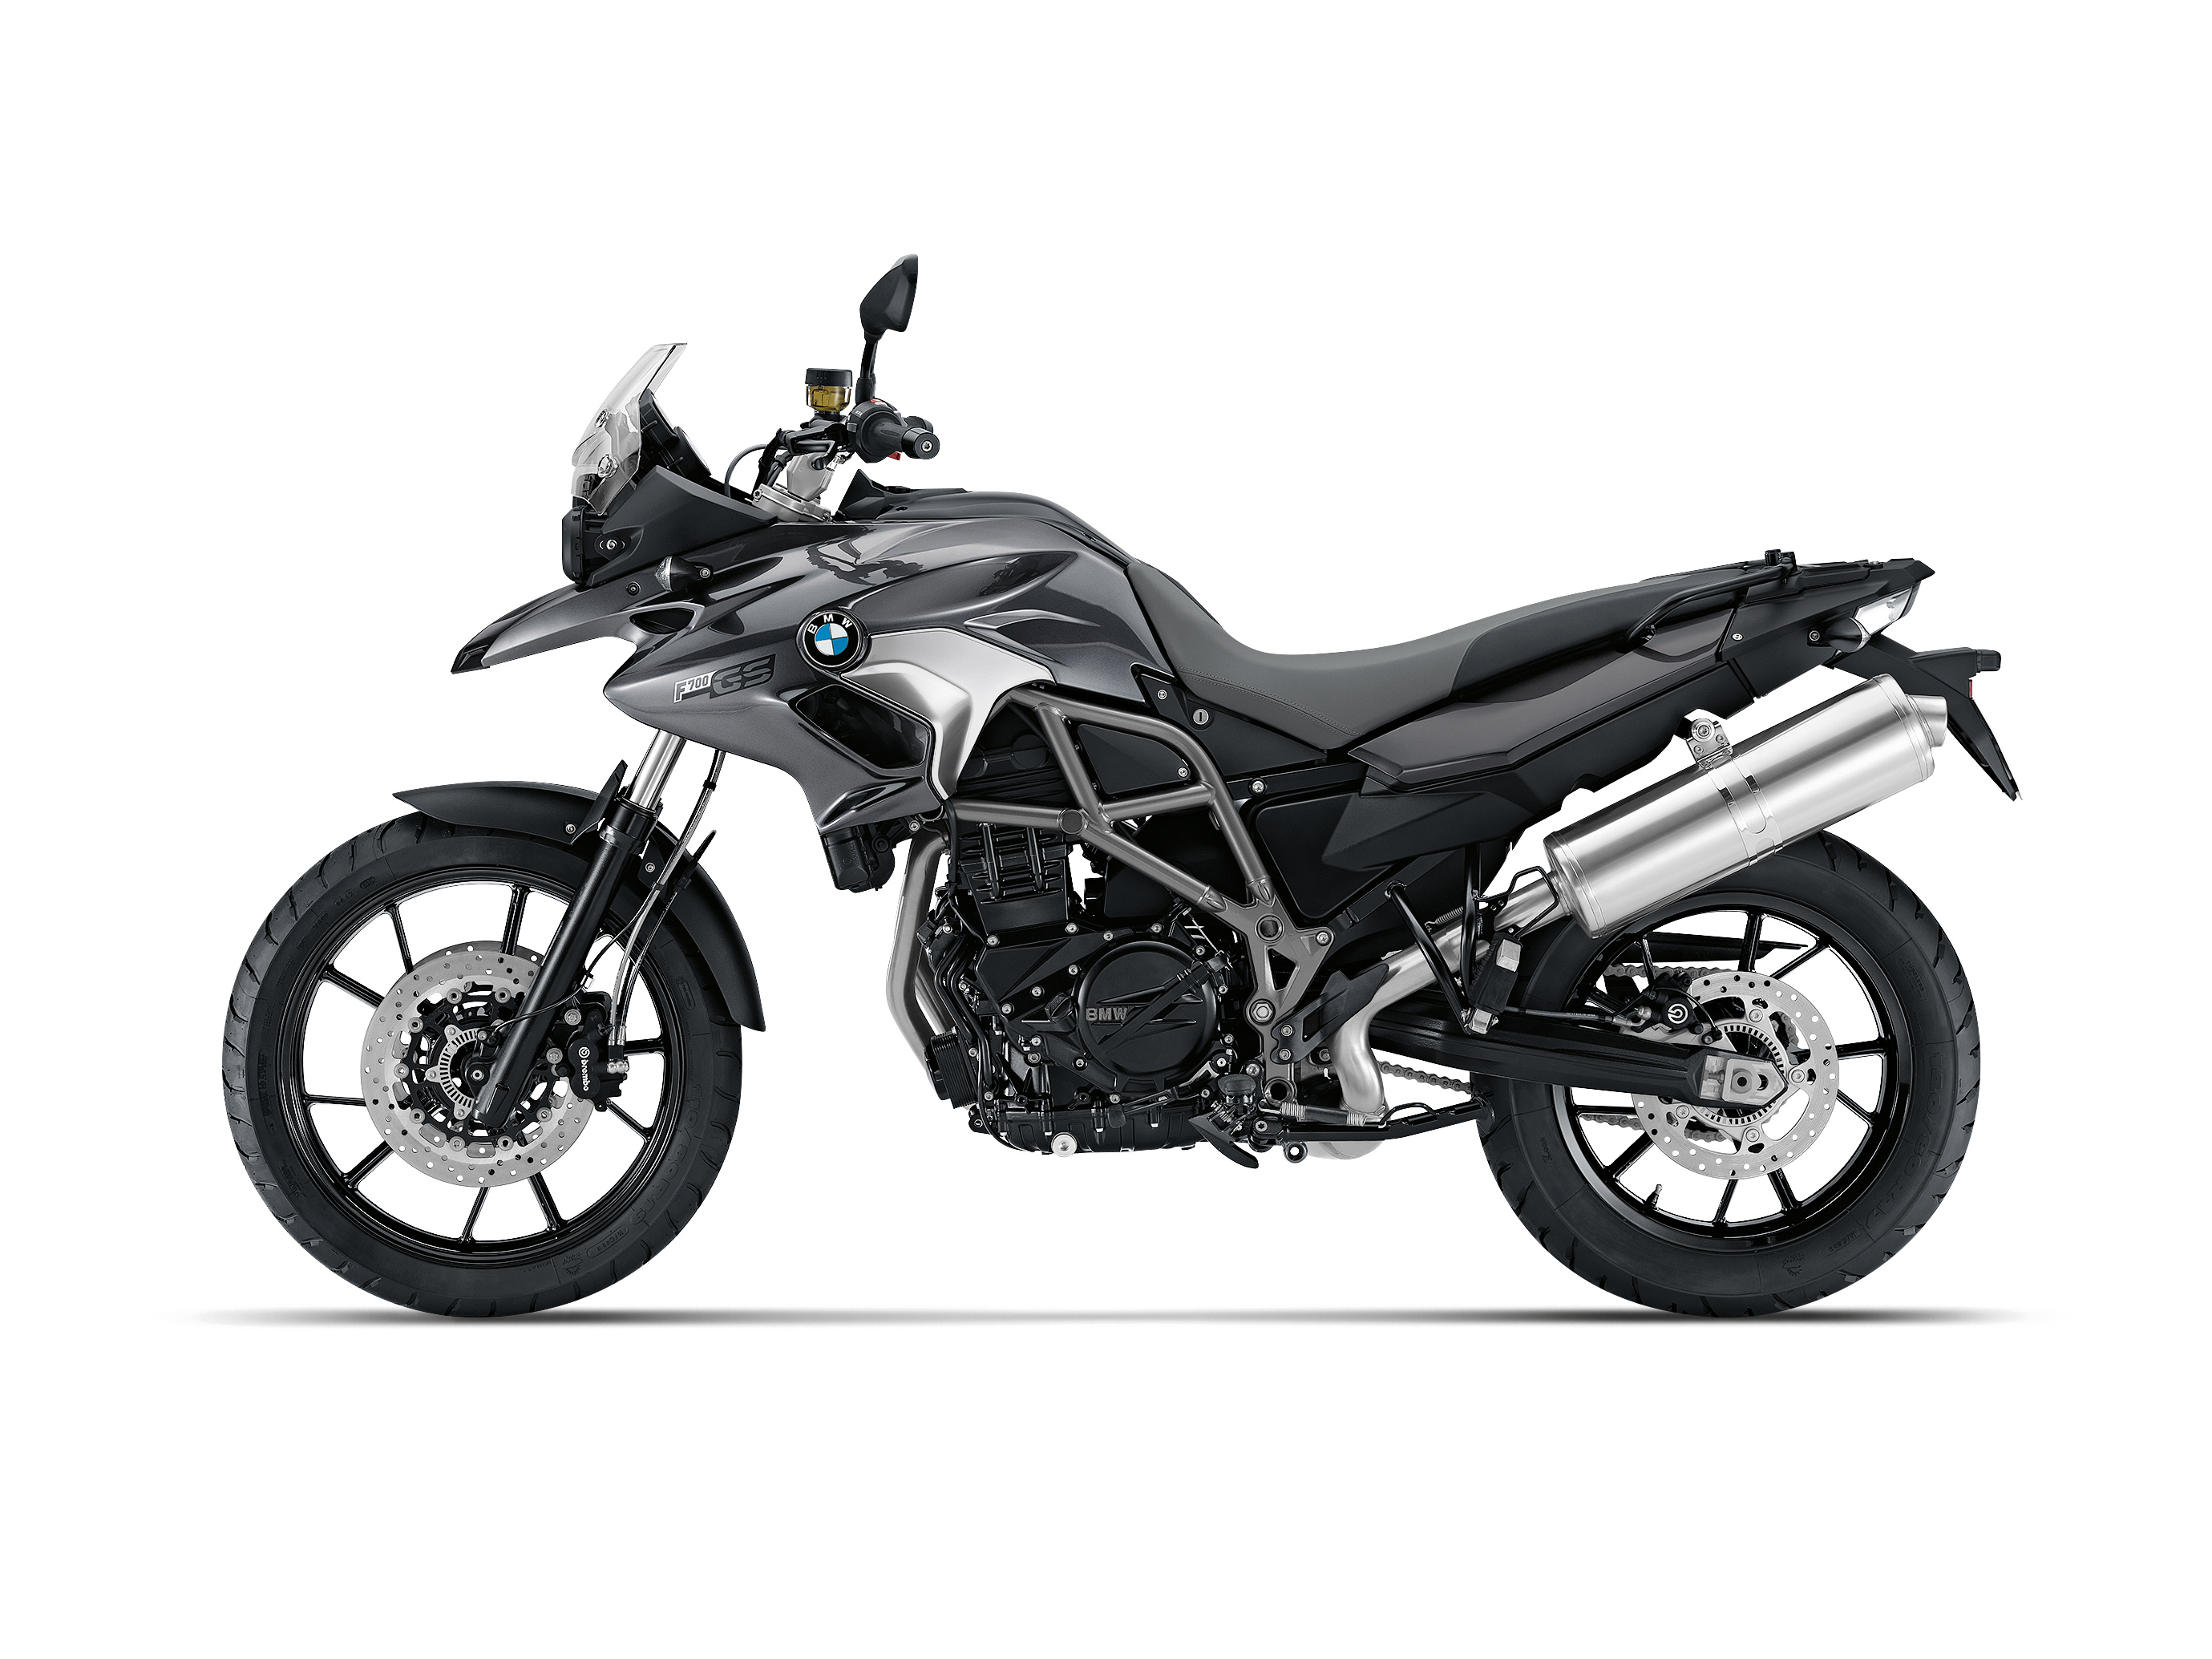 BMW F 700 GS Motorcycle Review - Dual-Sport Heaven?